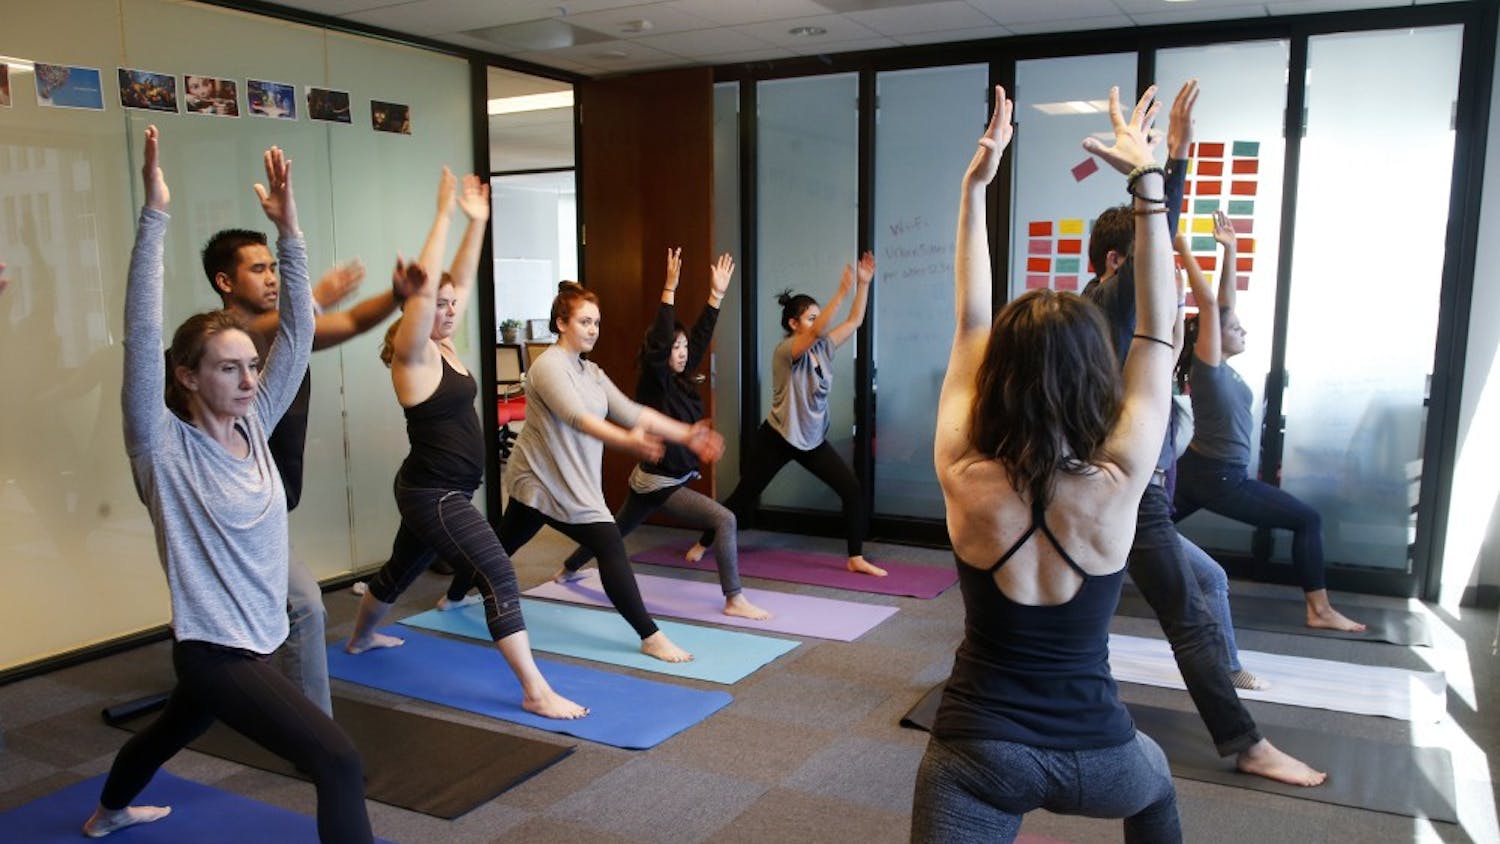 A group of people do yoga. The SRSC has yoga classes available free for students.